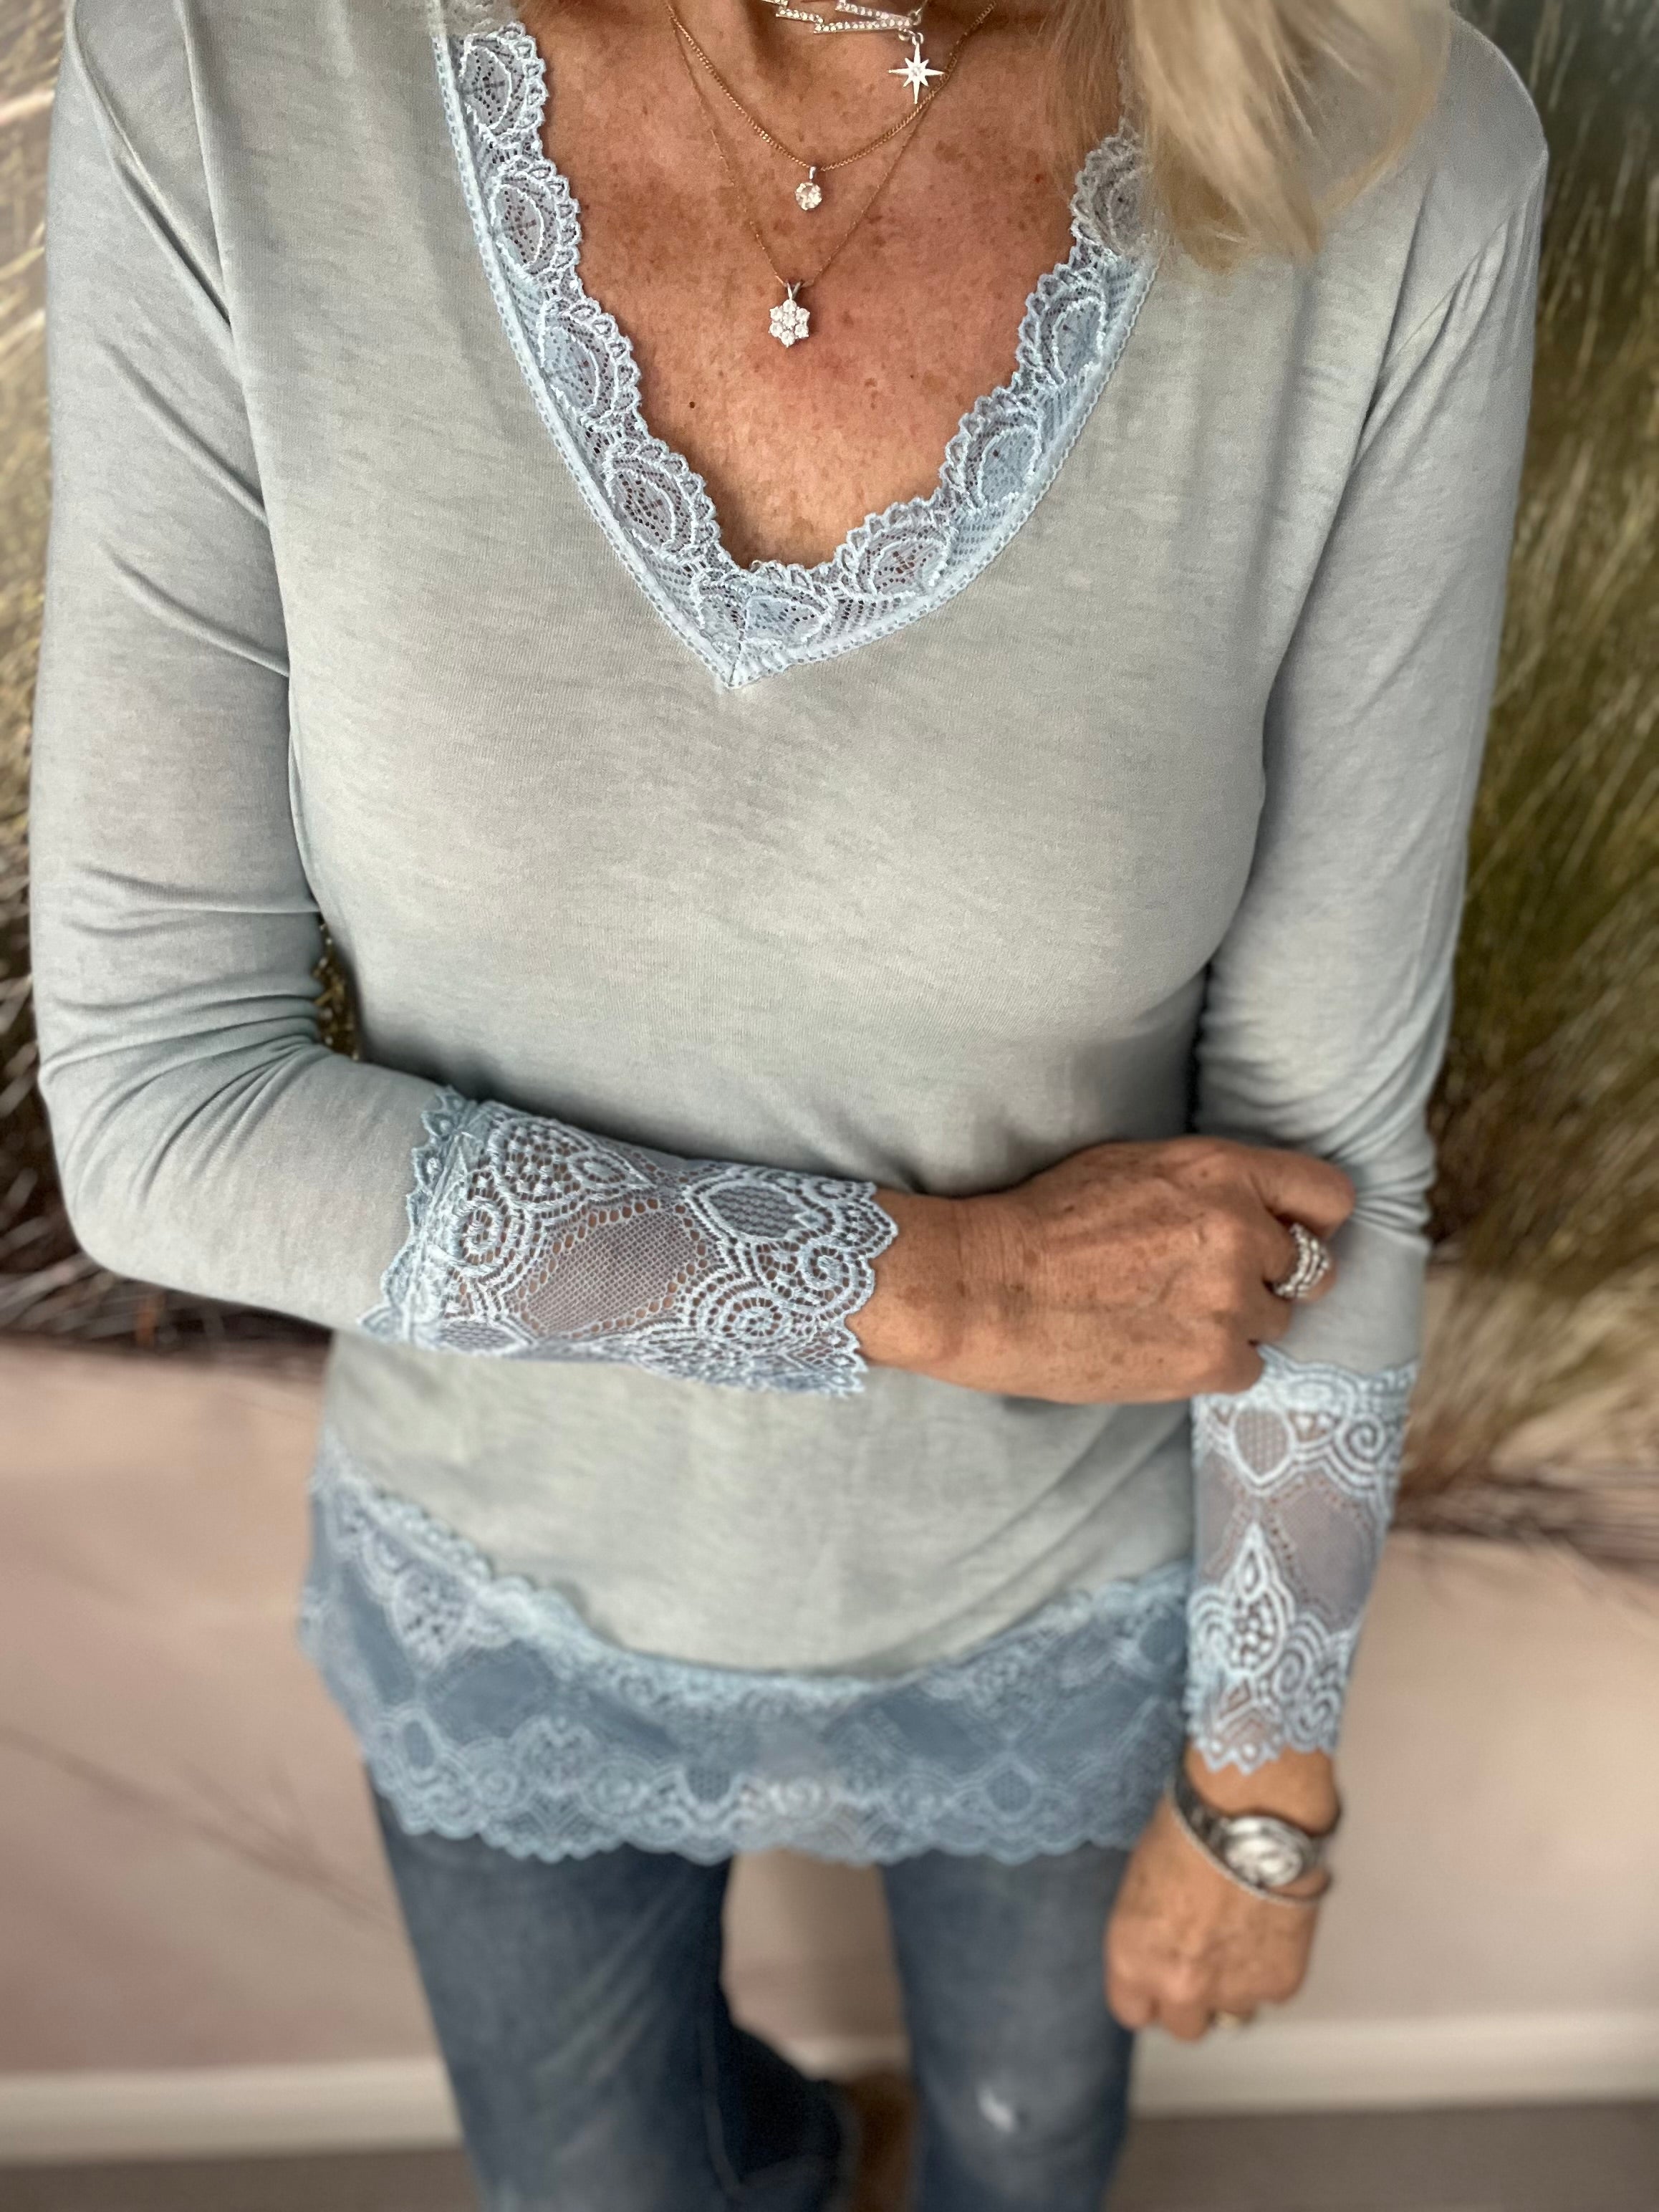 Luxe Base Top with Lace Trim in Pale Blue